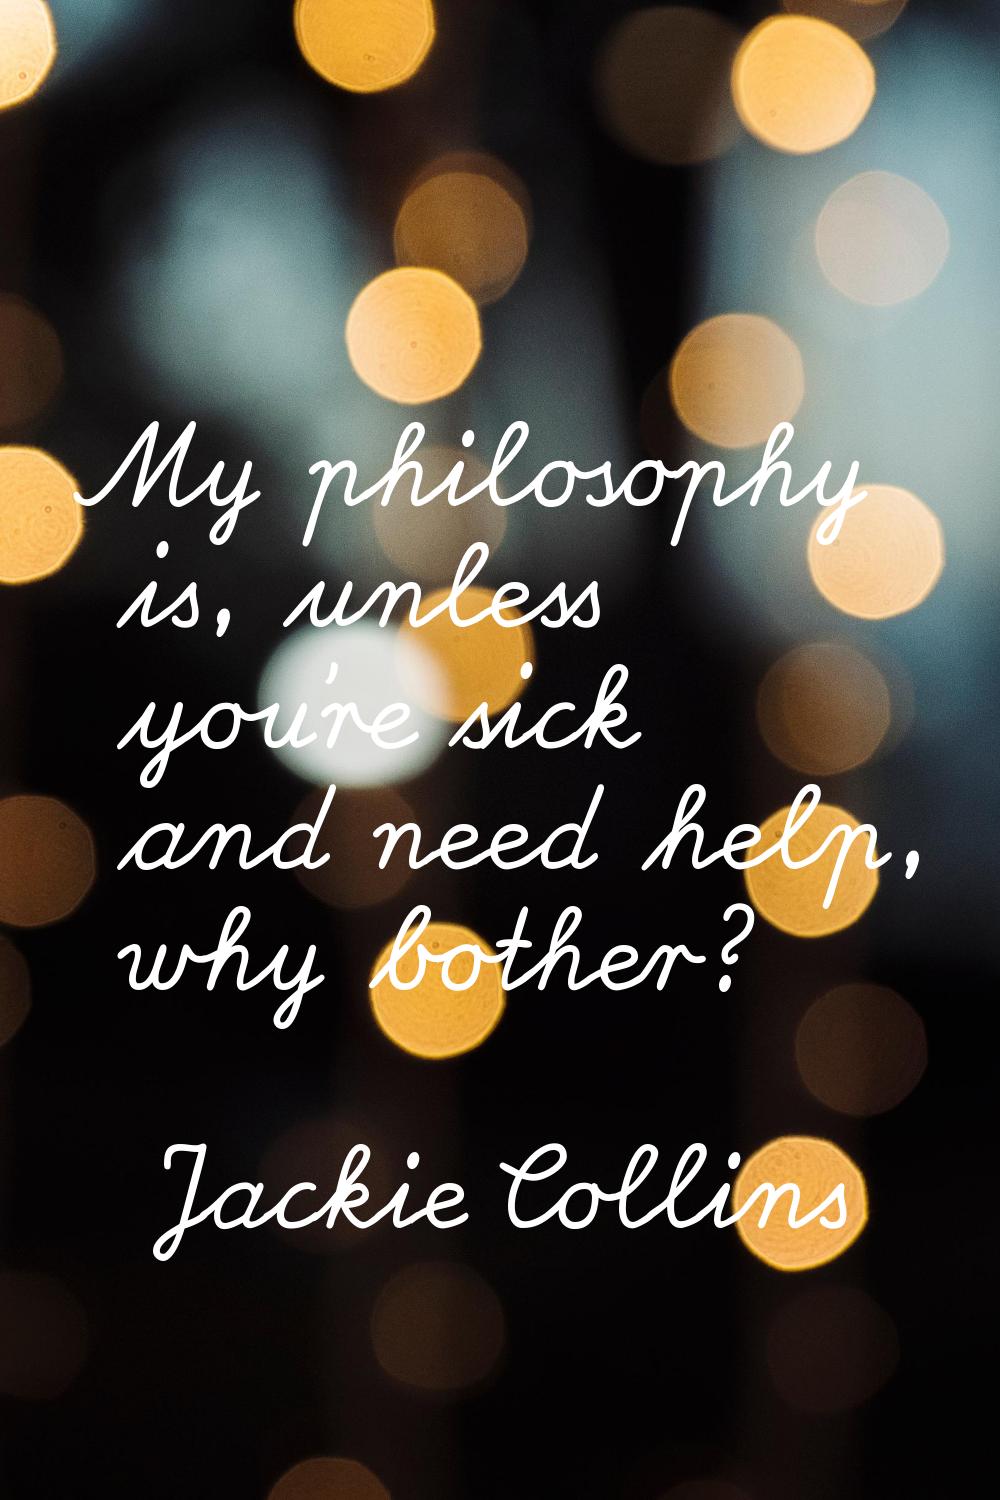 My philosophy is, unless you're sick and need help, why bother?